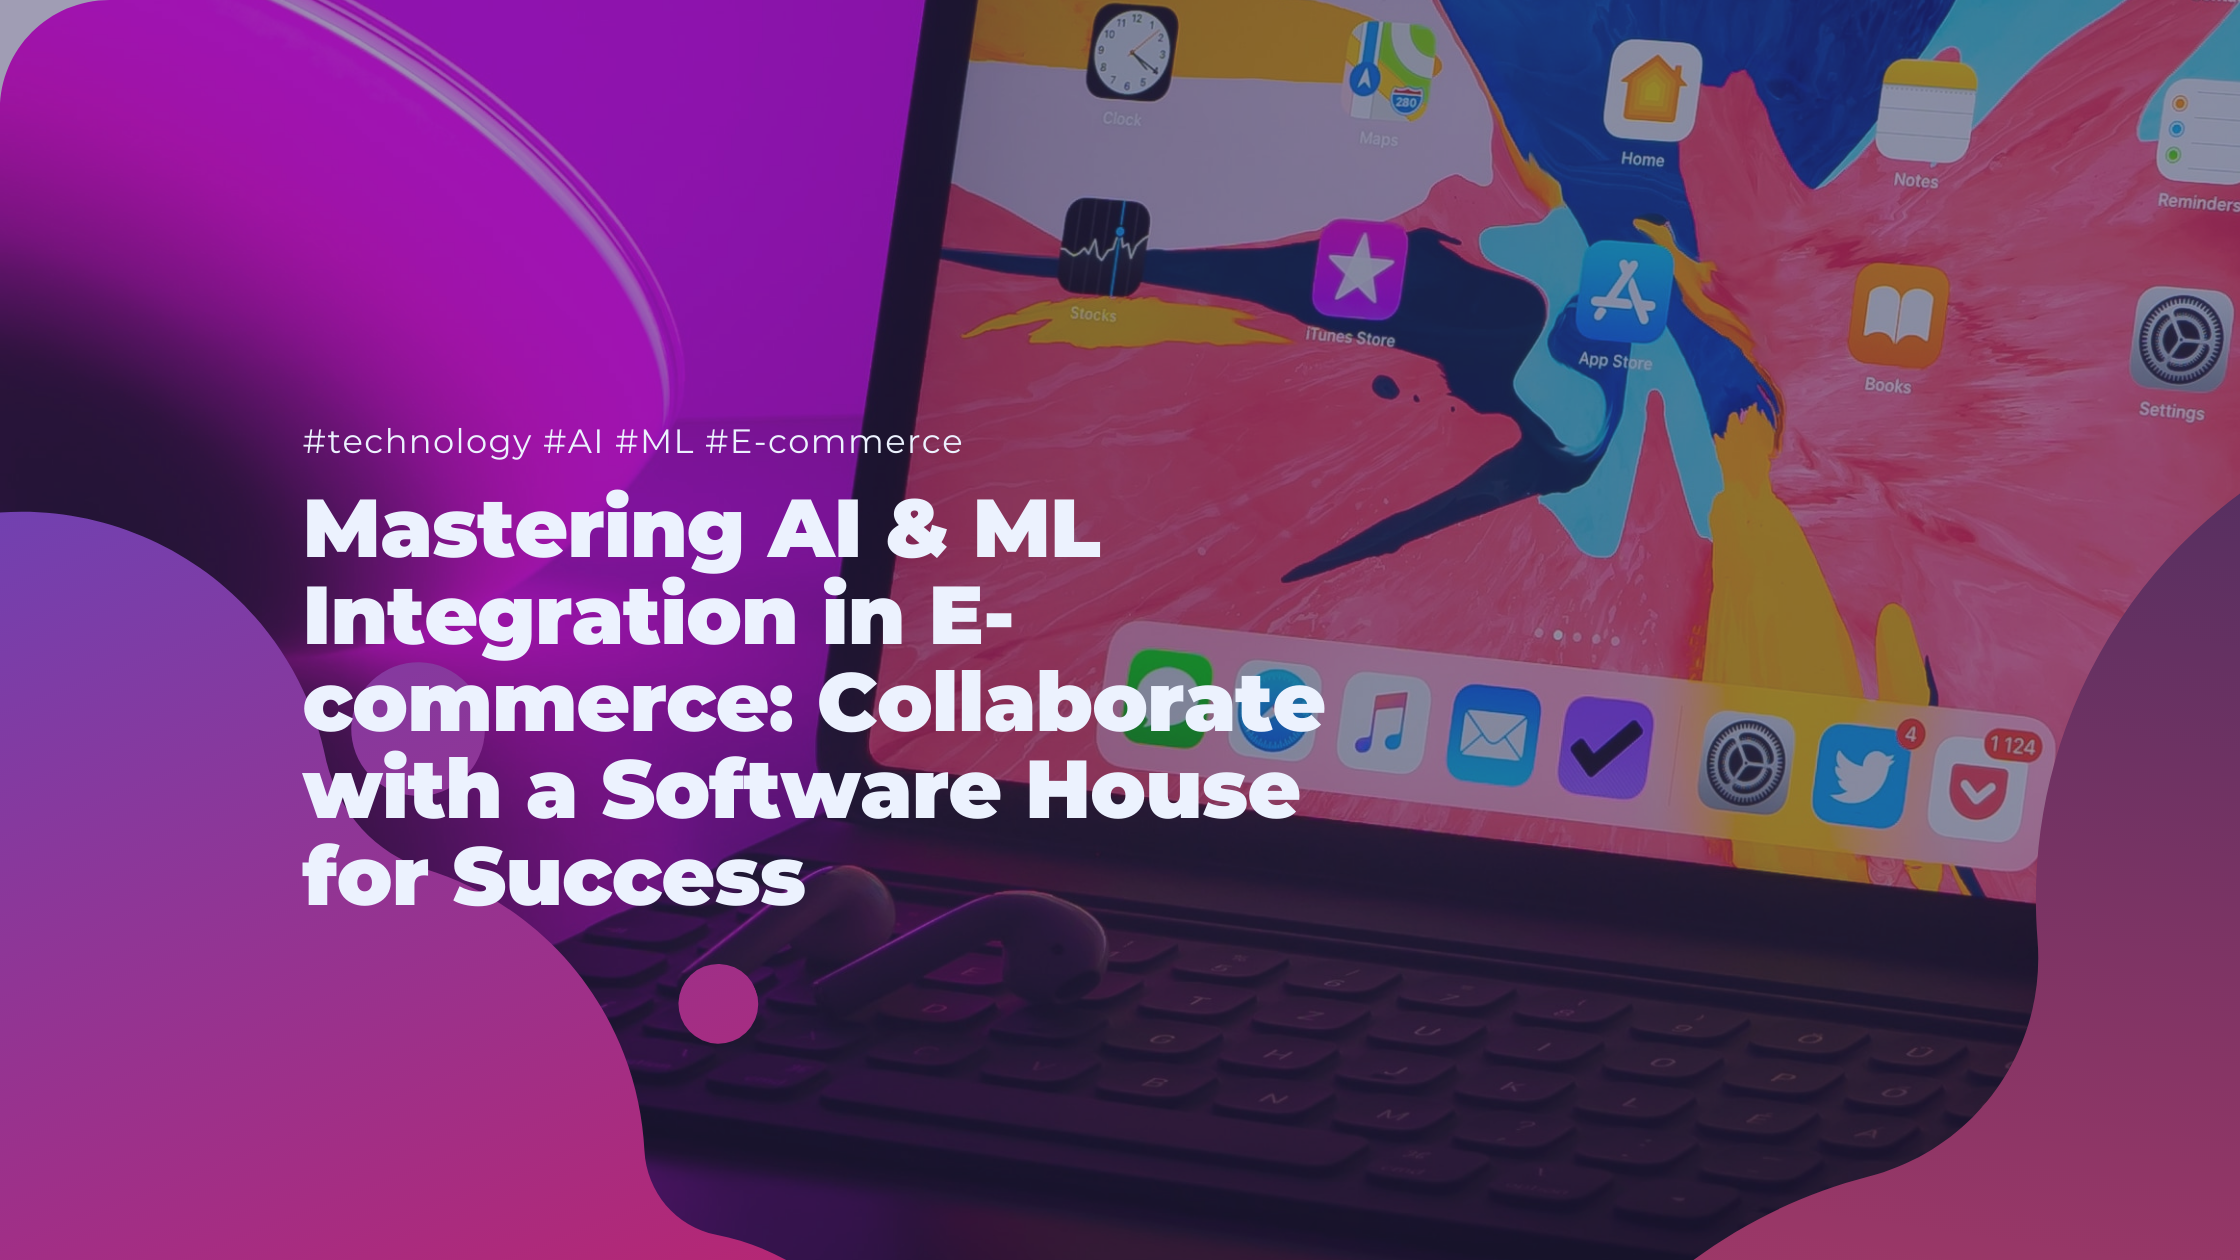 Mastering AI & ML Integration in E-commerce: Collaborate with a Software House for Success